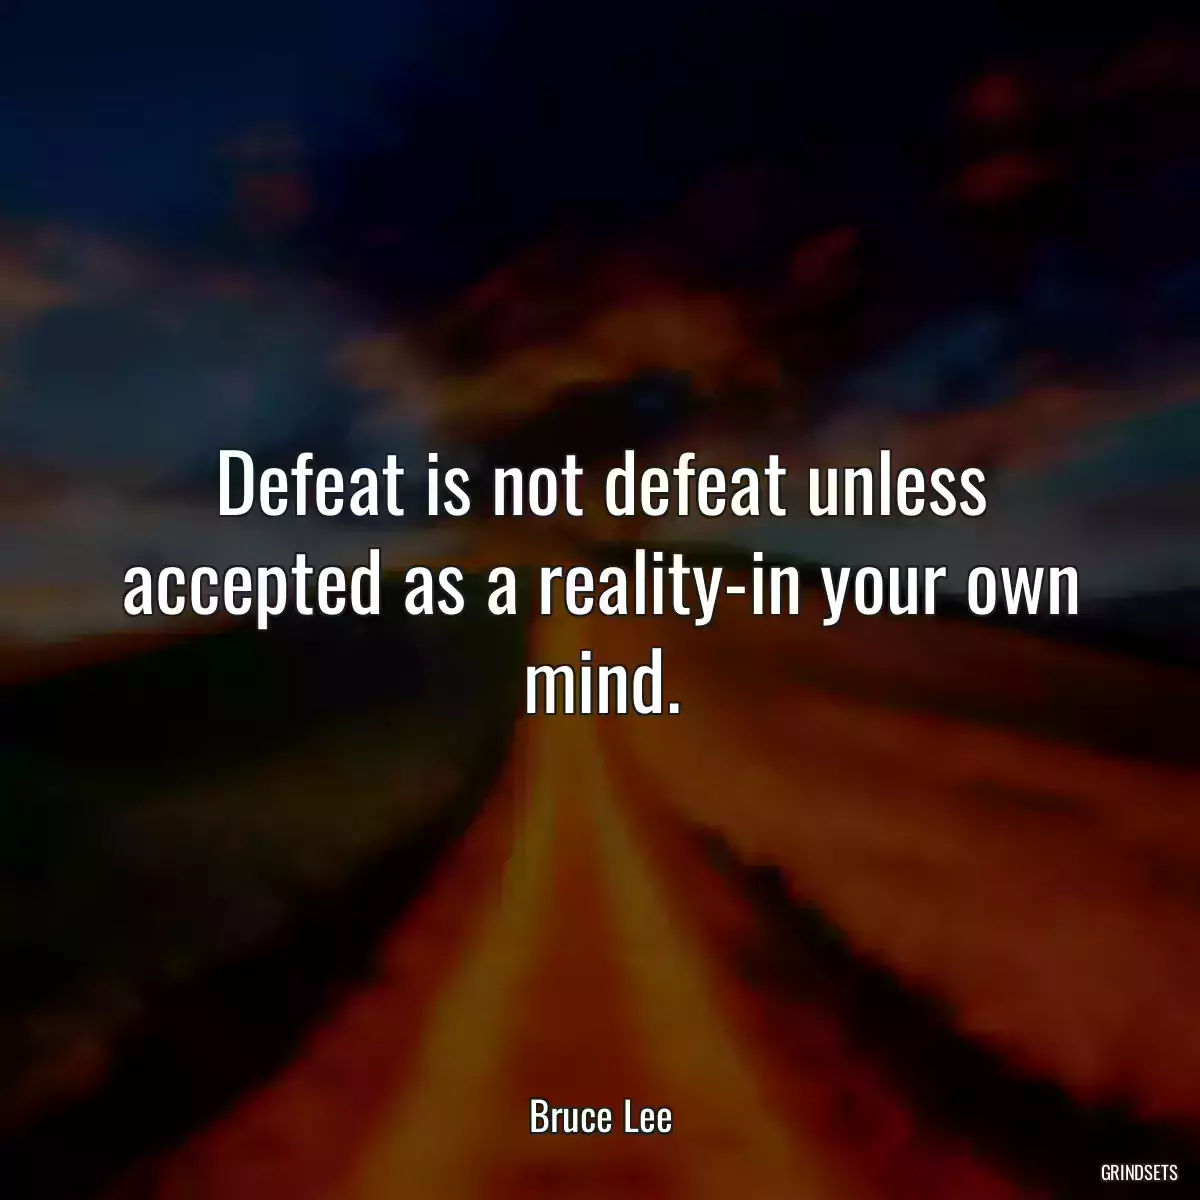 Defeat is not defeat unless accepted as a reality-in your own mind.